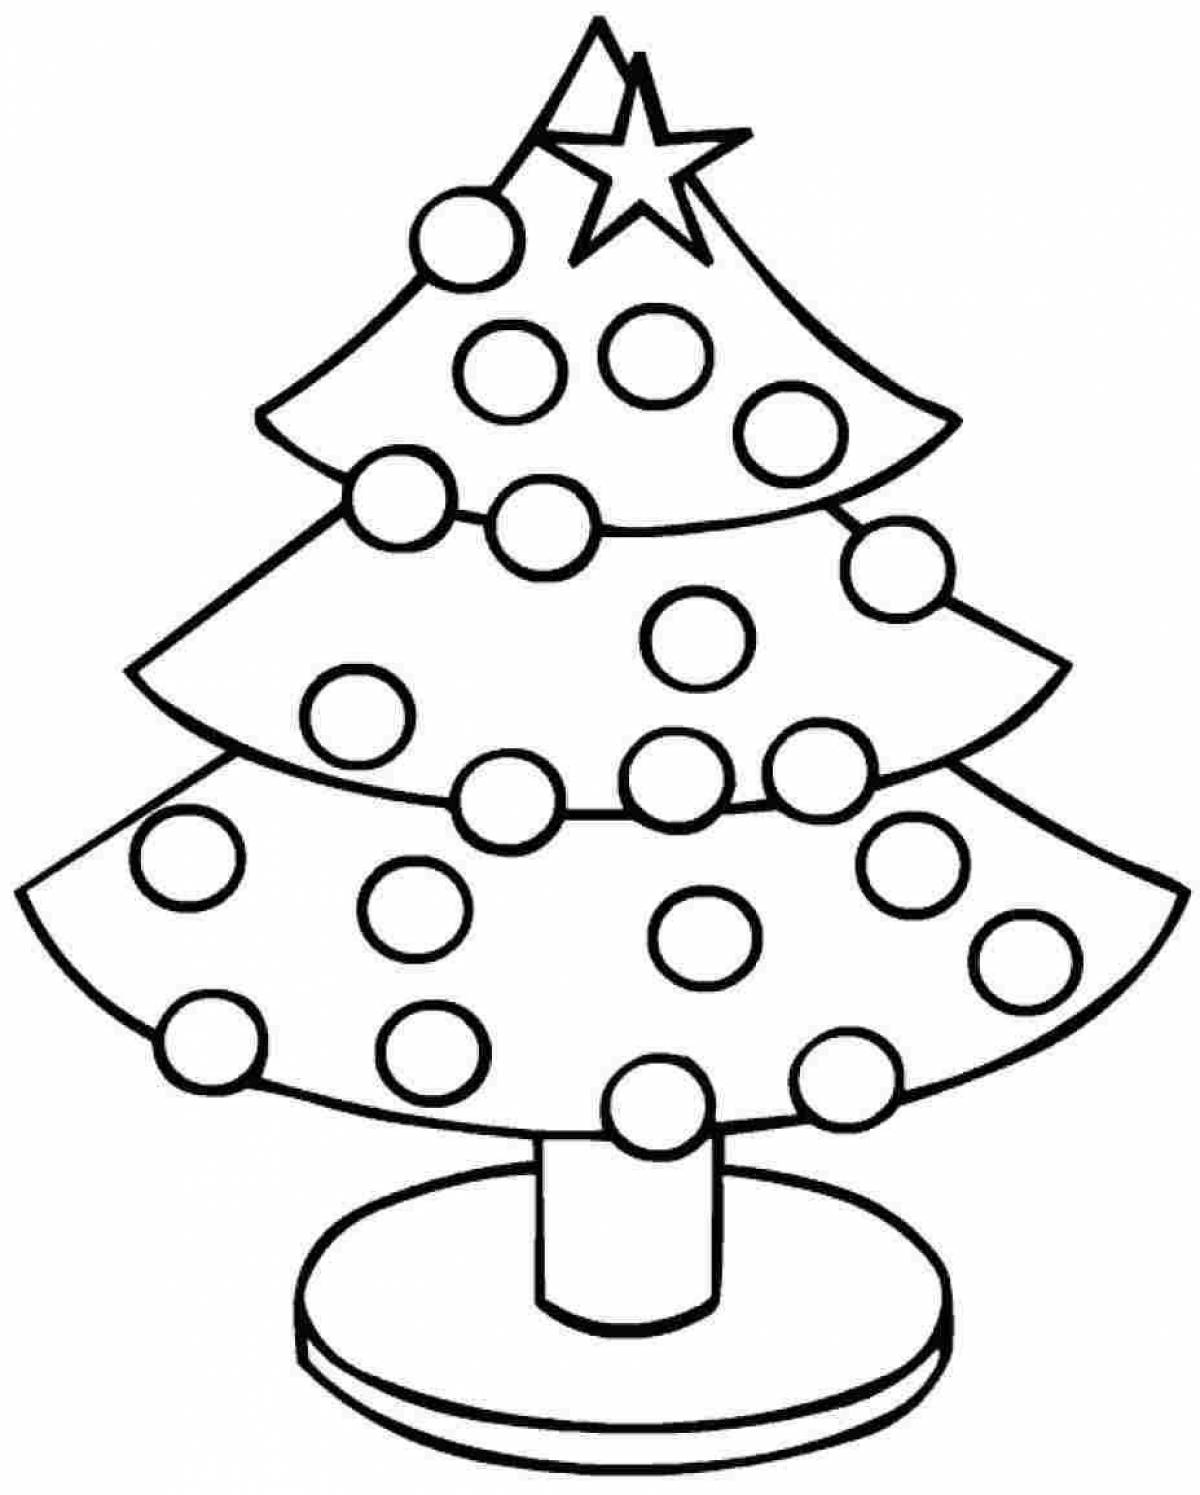 Bright Christmas tree coloring book for 3-4 year olds